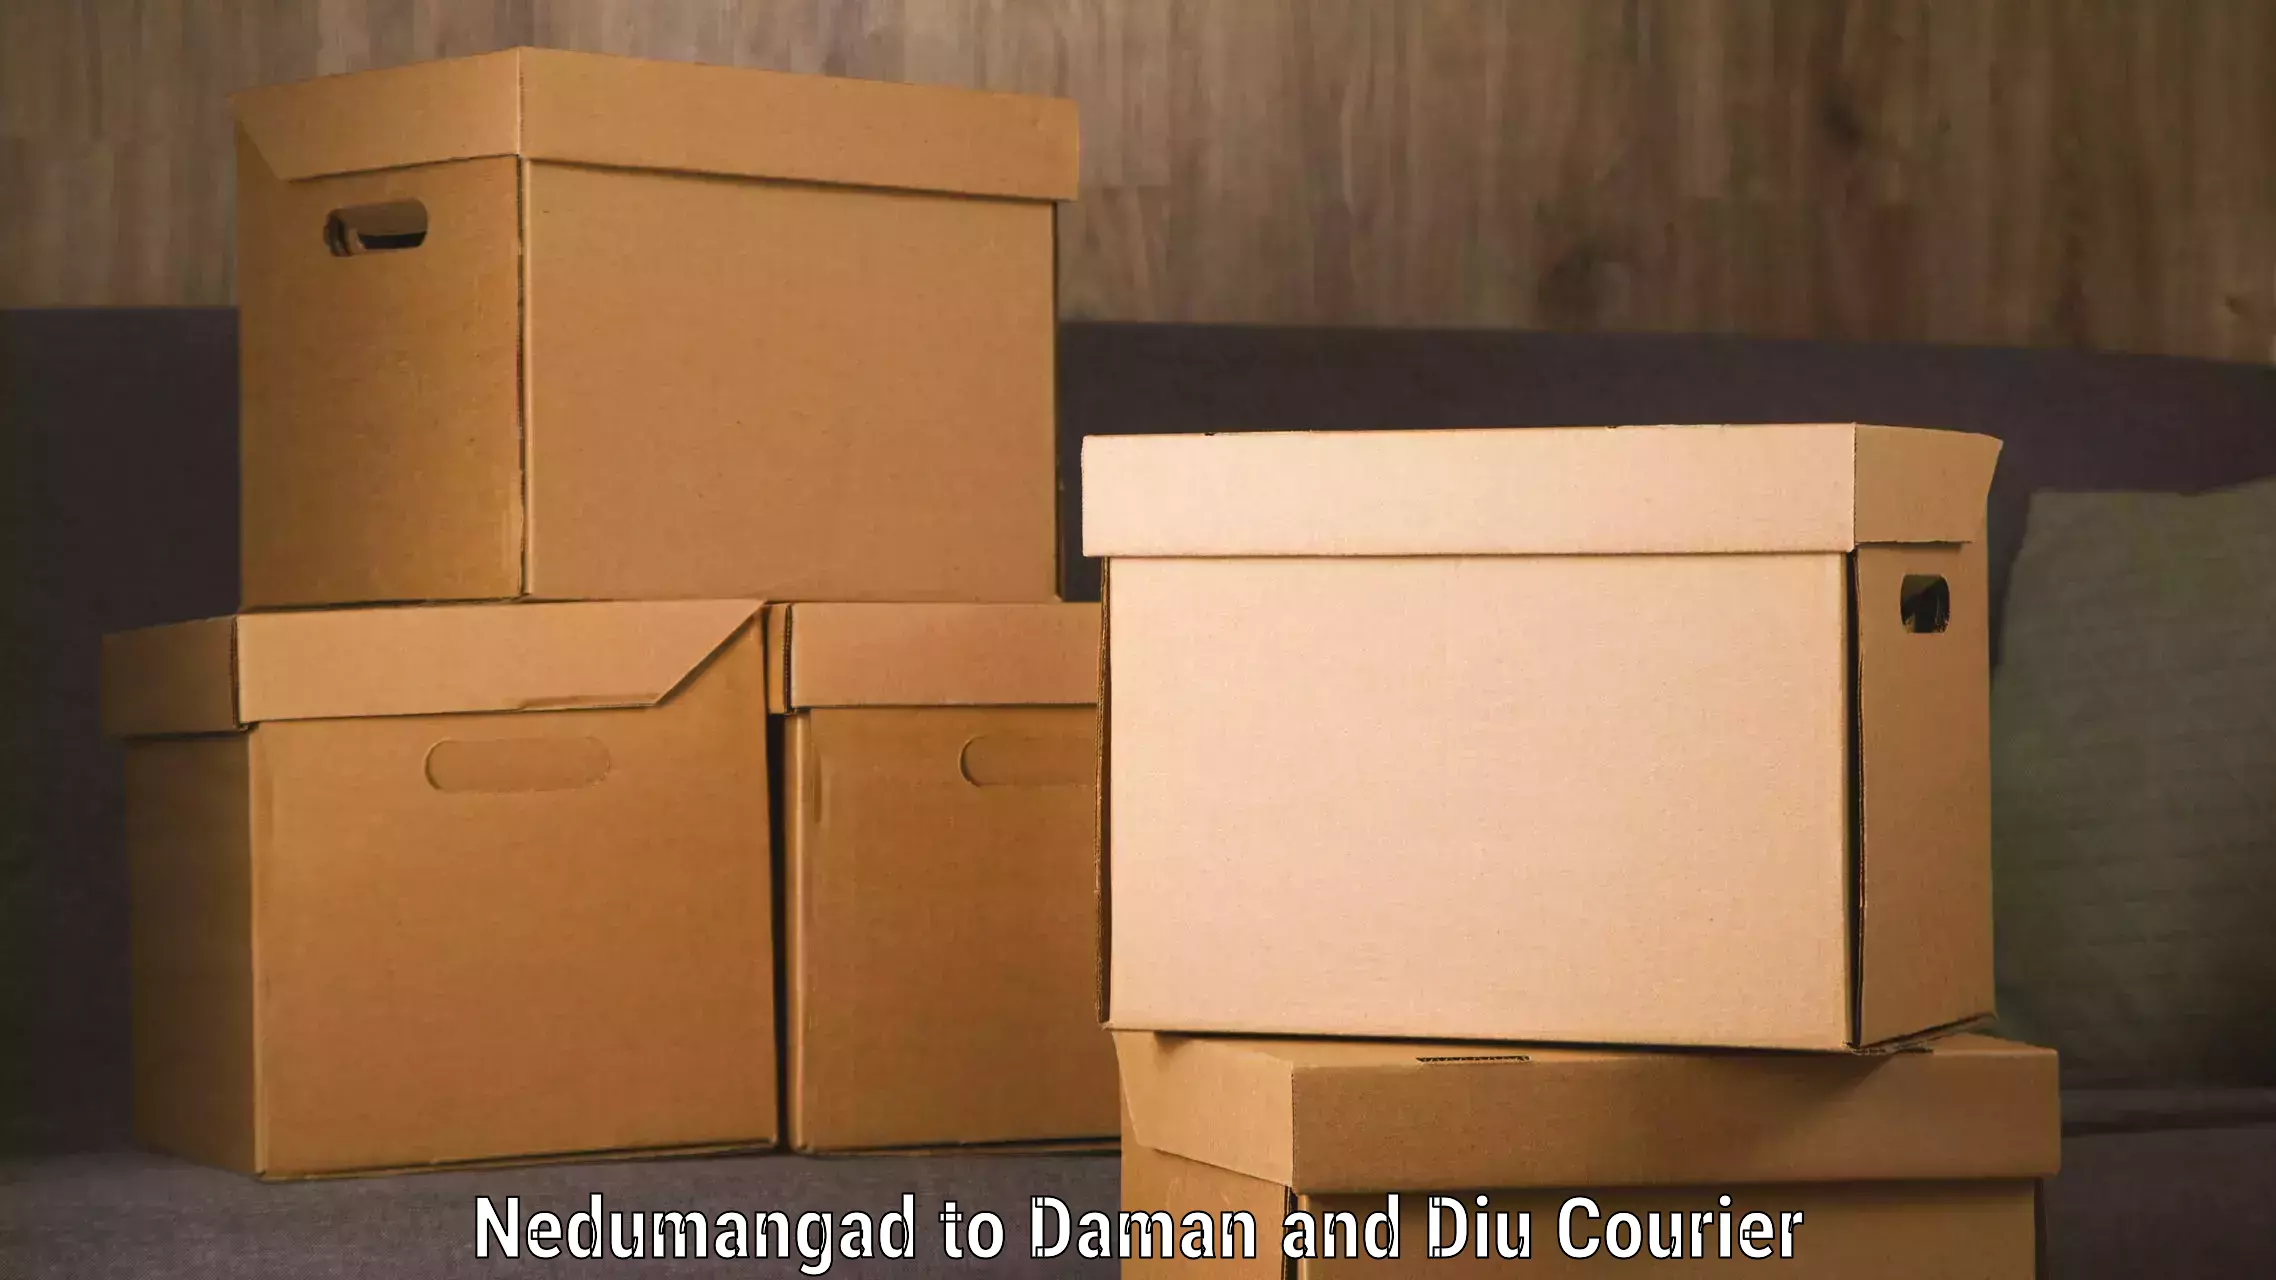 Supply chain delivery Nedumangad to Diu